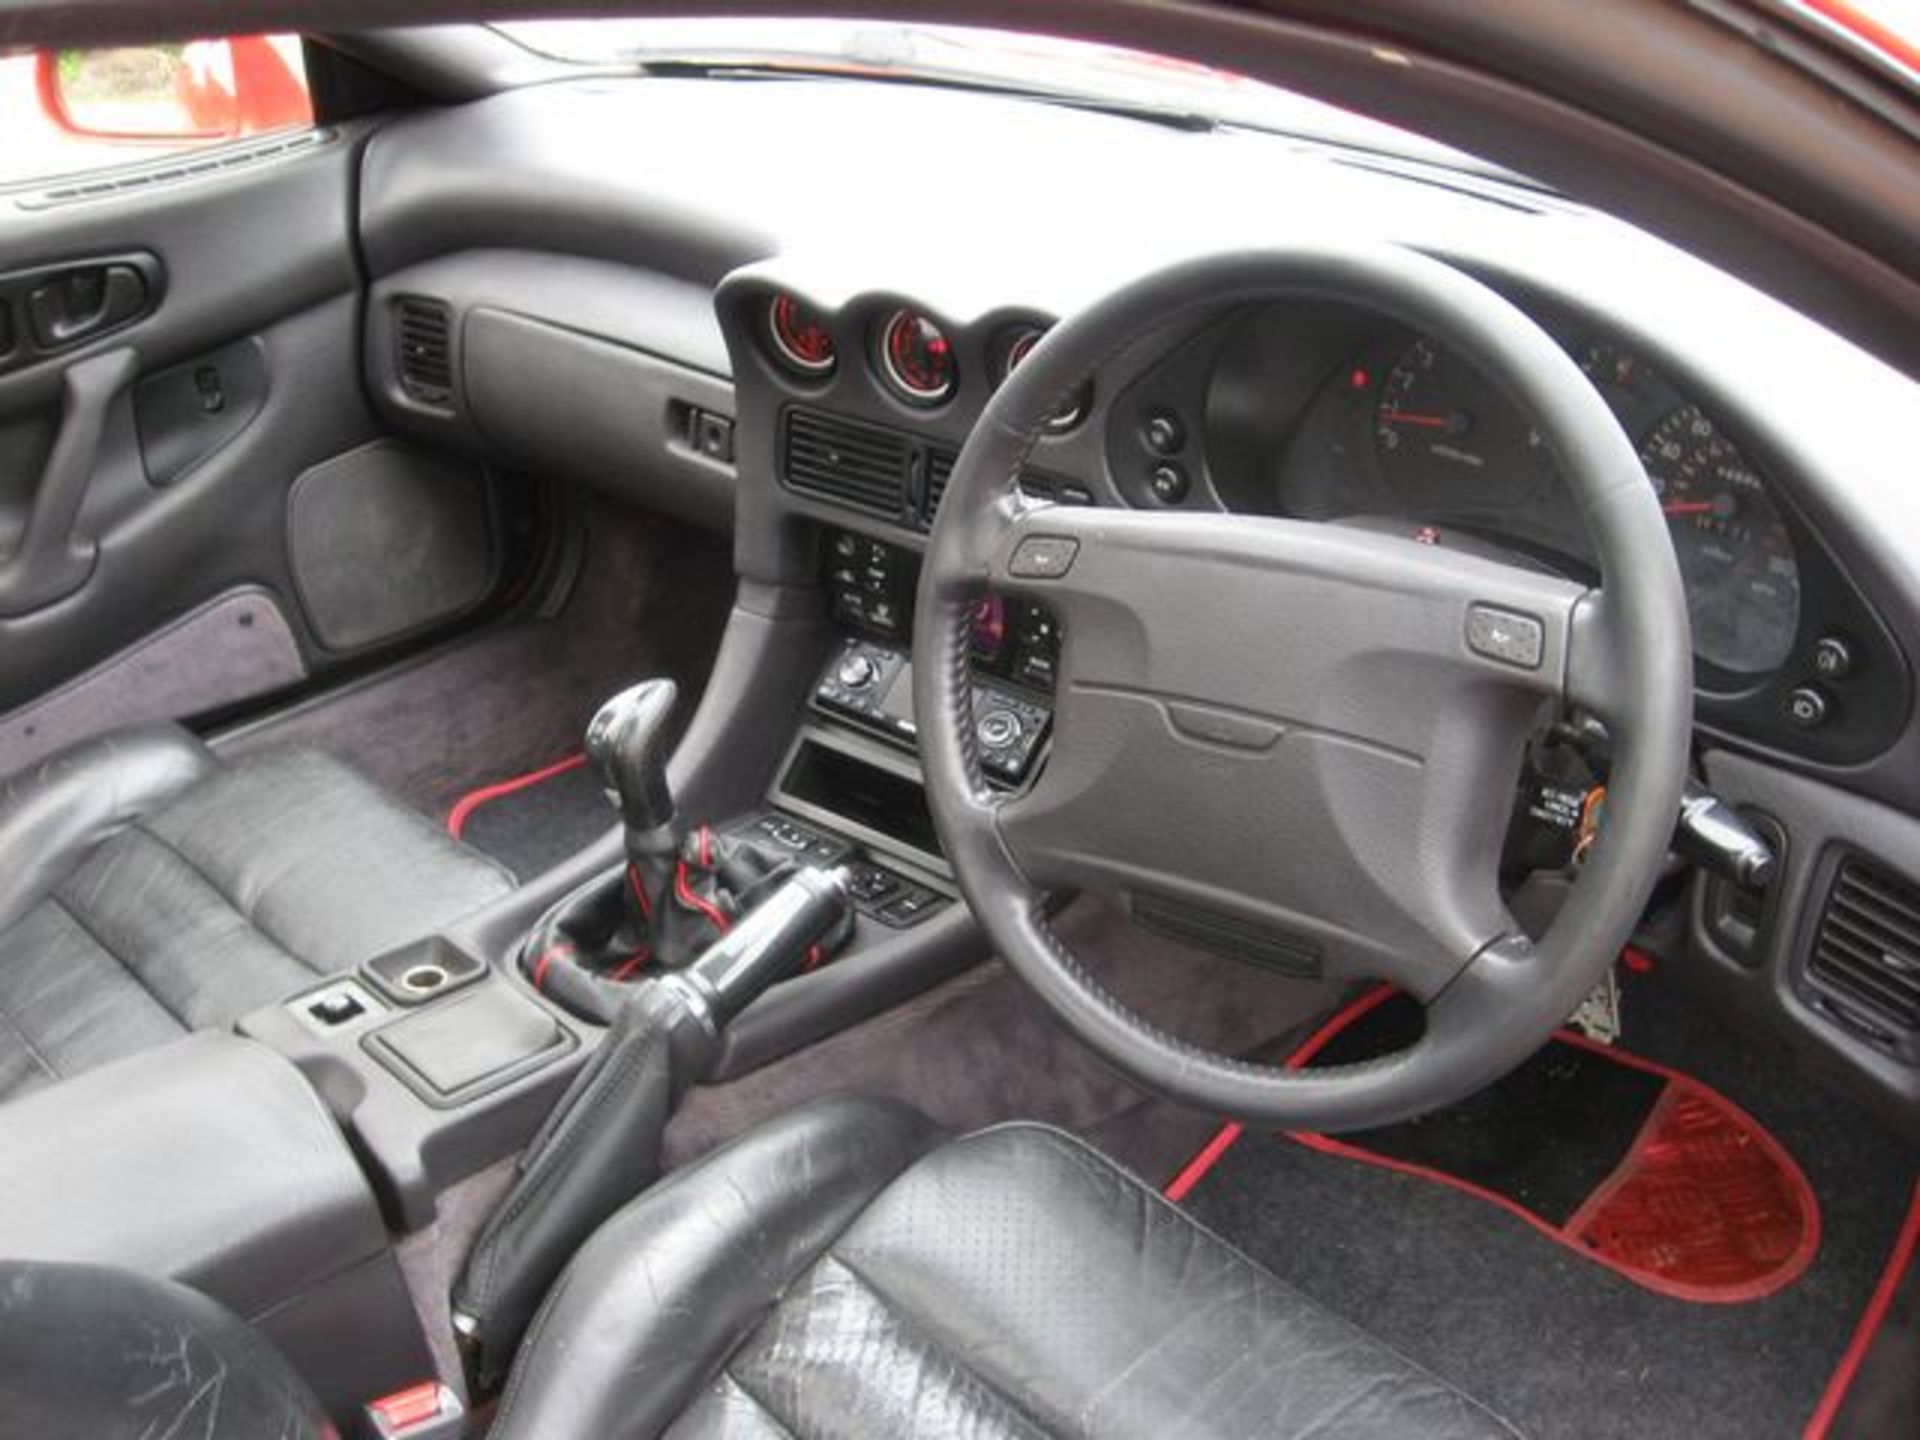 MITSUBISHI, 3000 GT V6 TURBO - 2972cc, Chassis number JMAMNZ16APY000228 - presented with an - Image 9 of 17